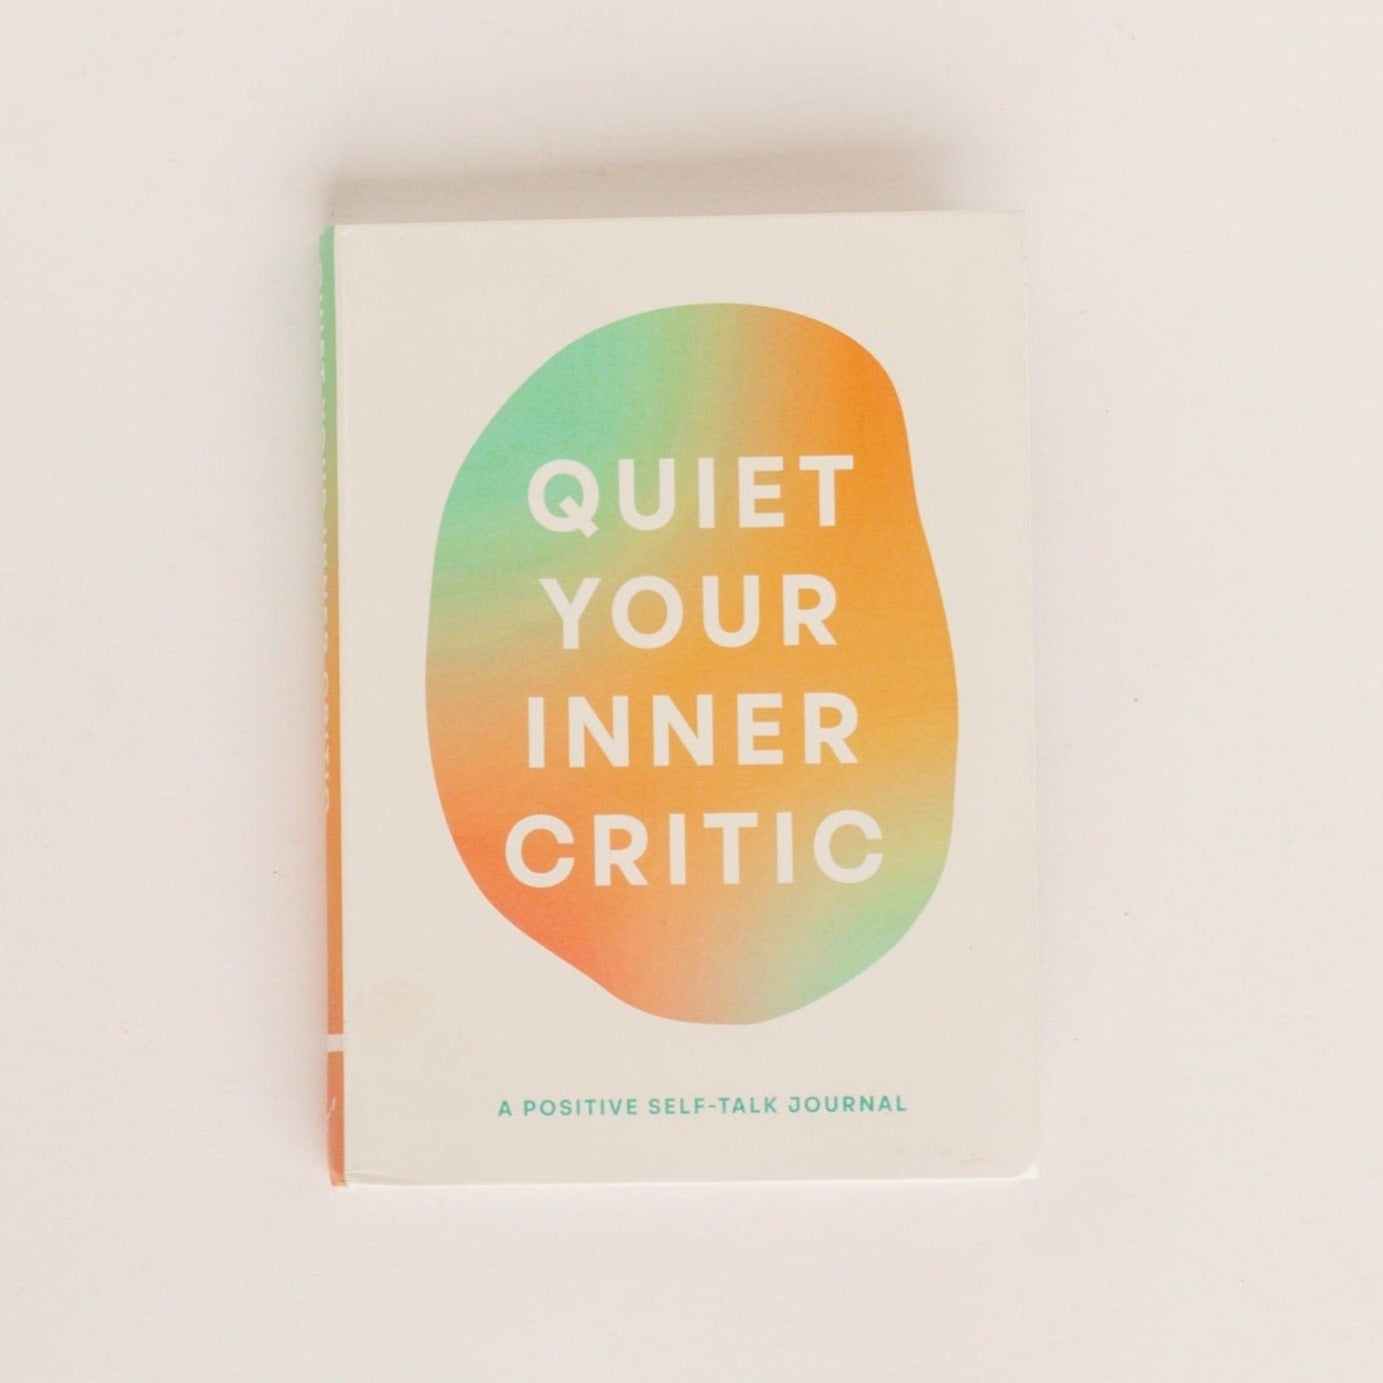 Cover of Quiet Your Inner Critic book.